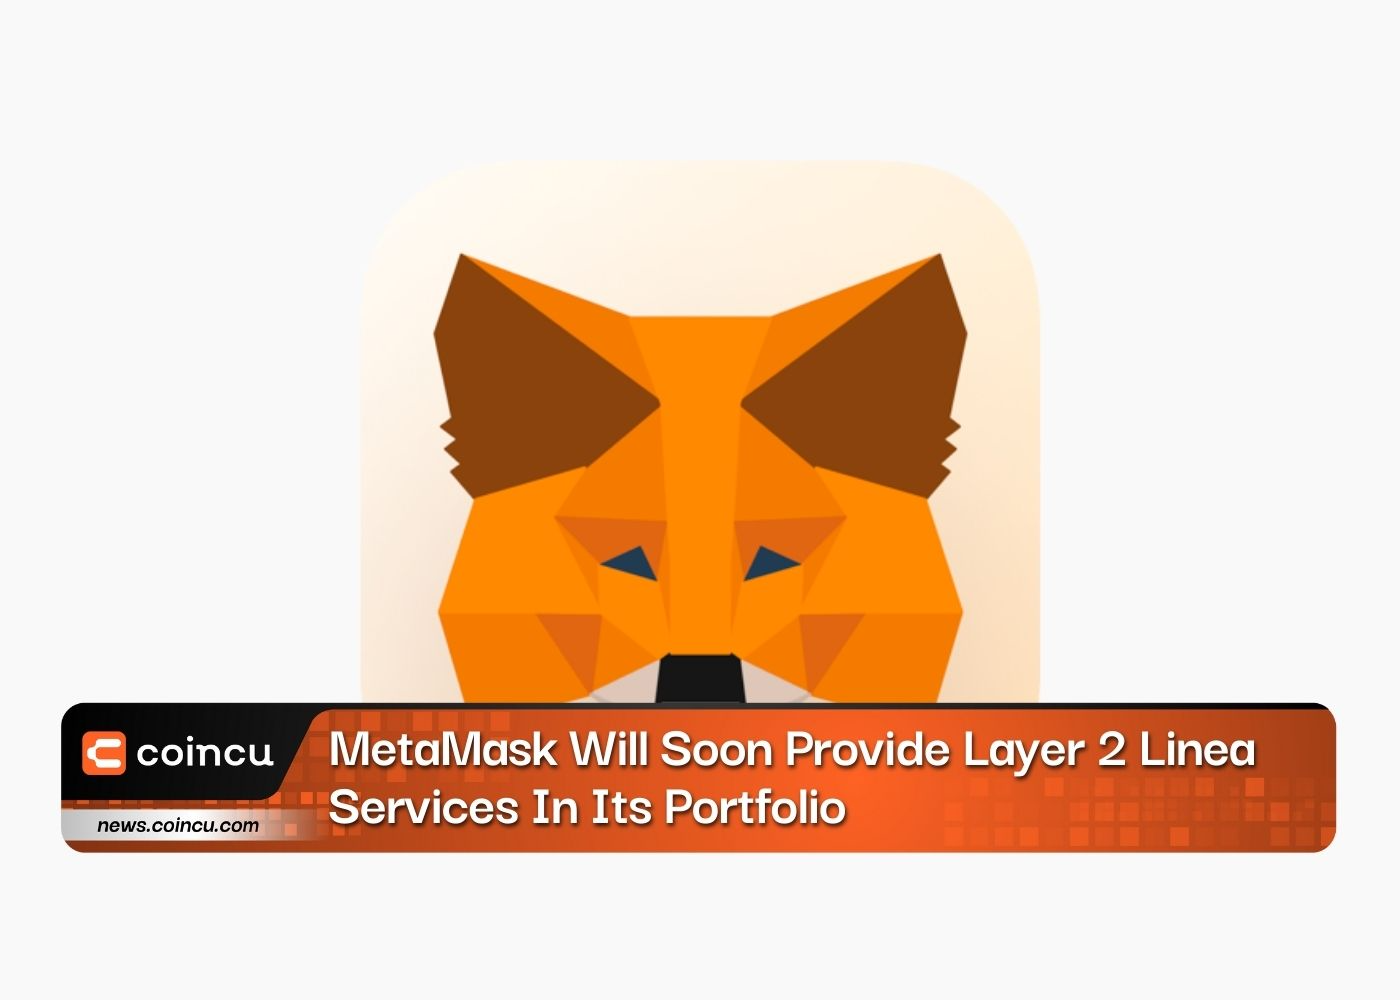 MetaMask Will Soon Provide Layer 2 Linea Services In Its Portfolio